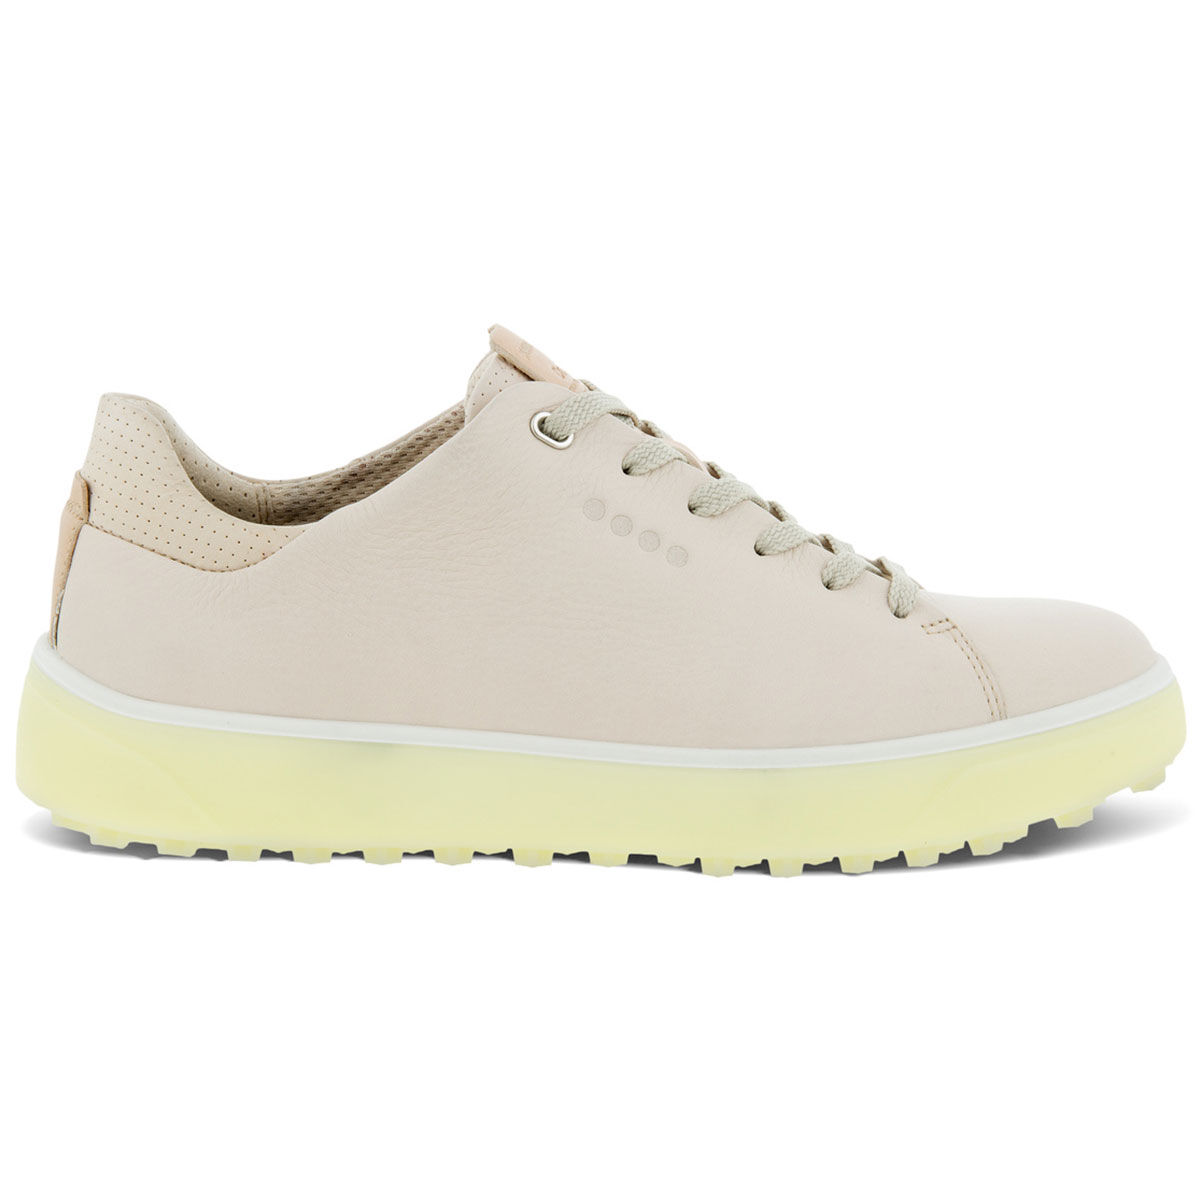 Chaussures ECCO Golf Tray pour femmes, femme, 4-4.5, Limestone/lime, Normal | Online Golf